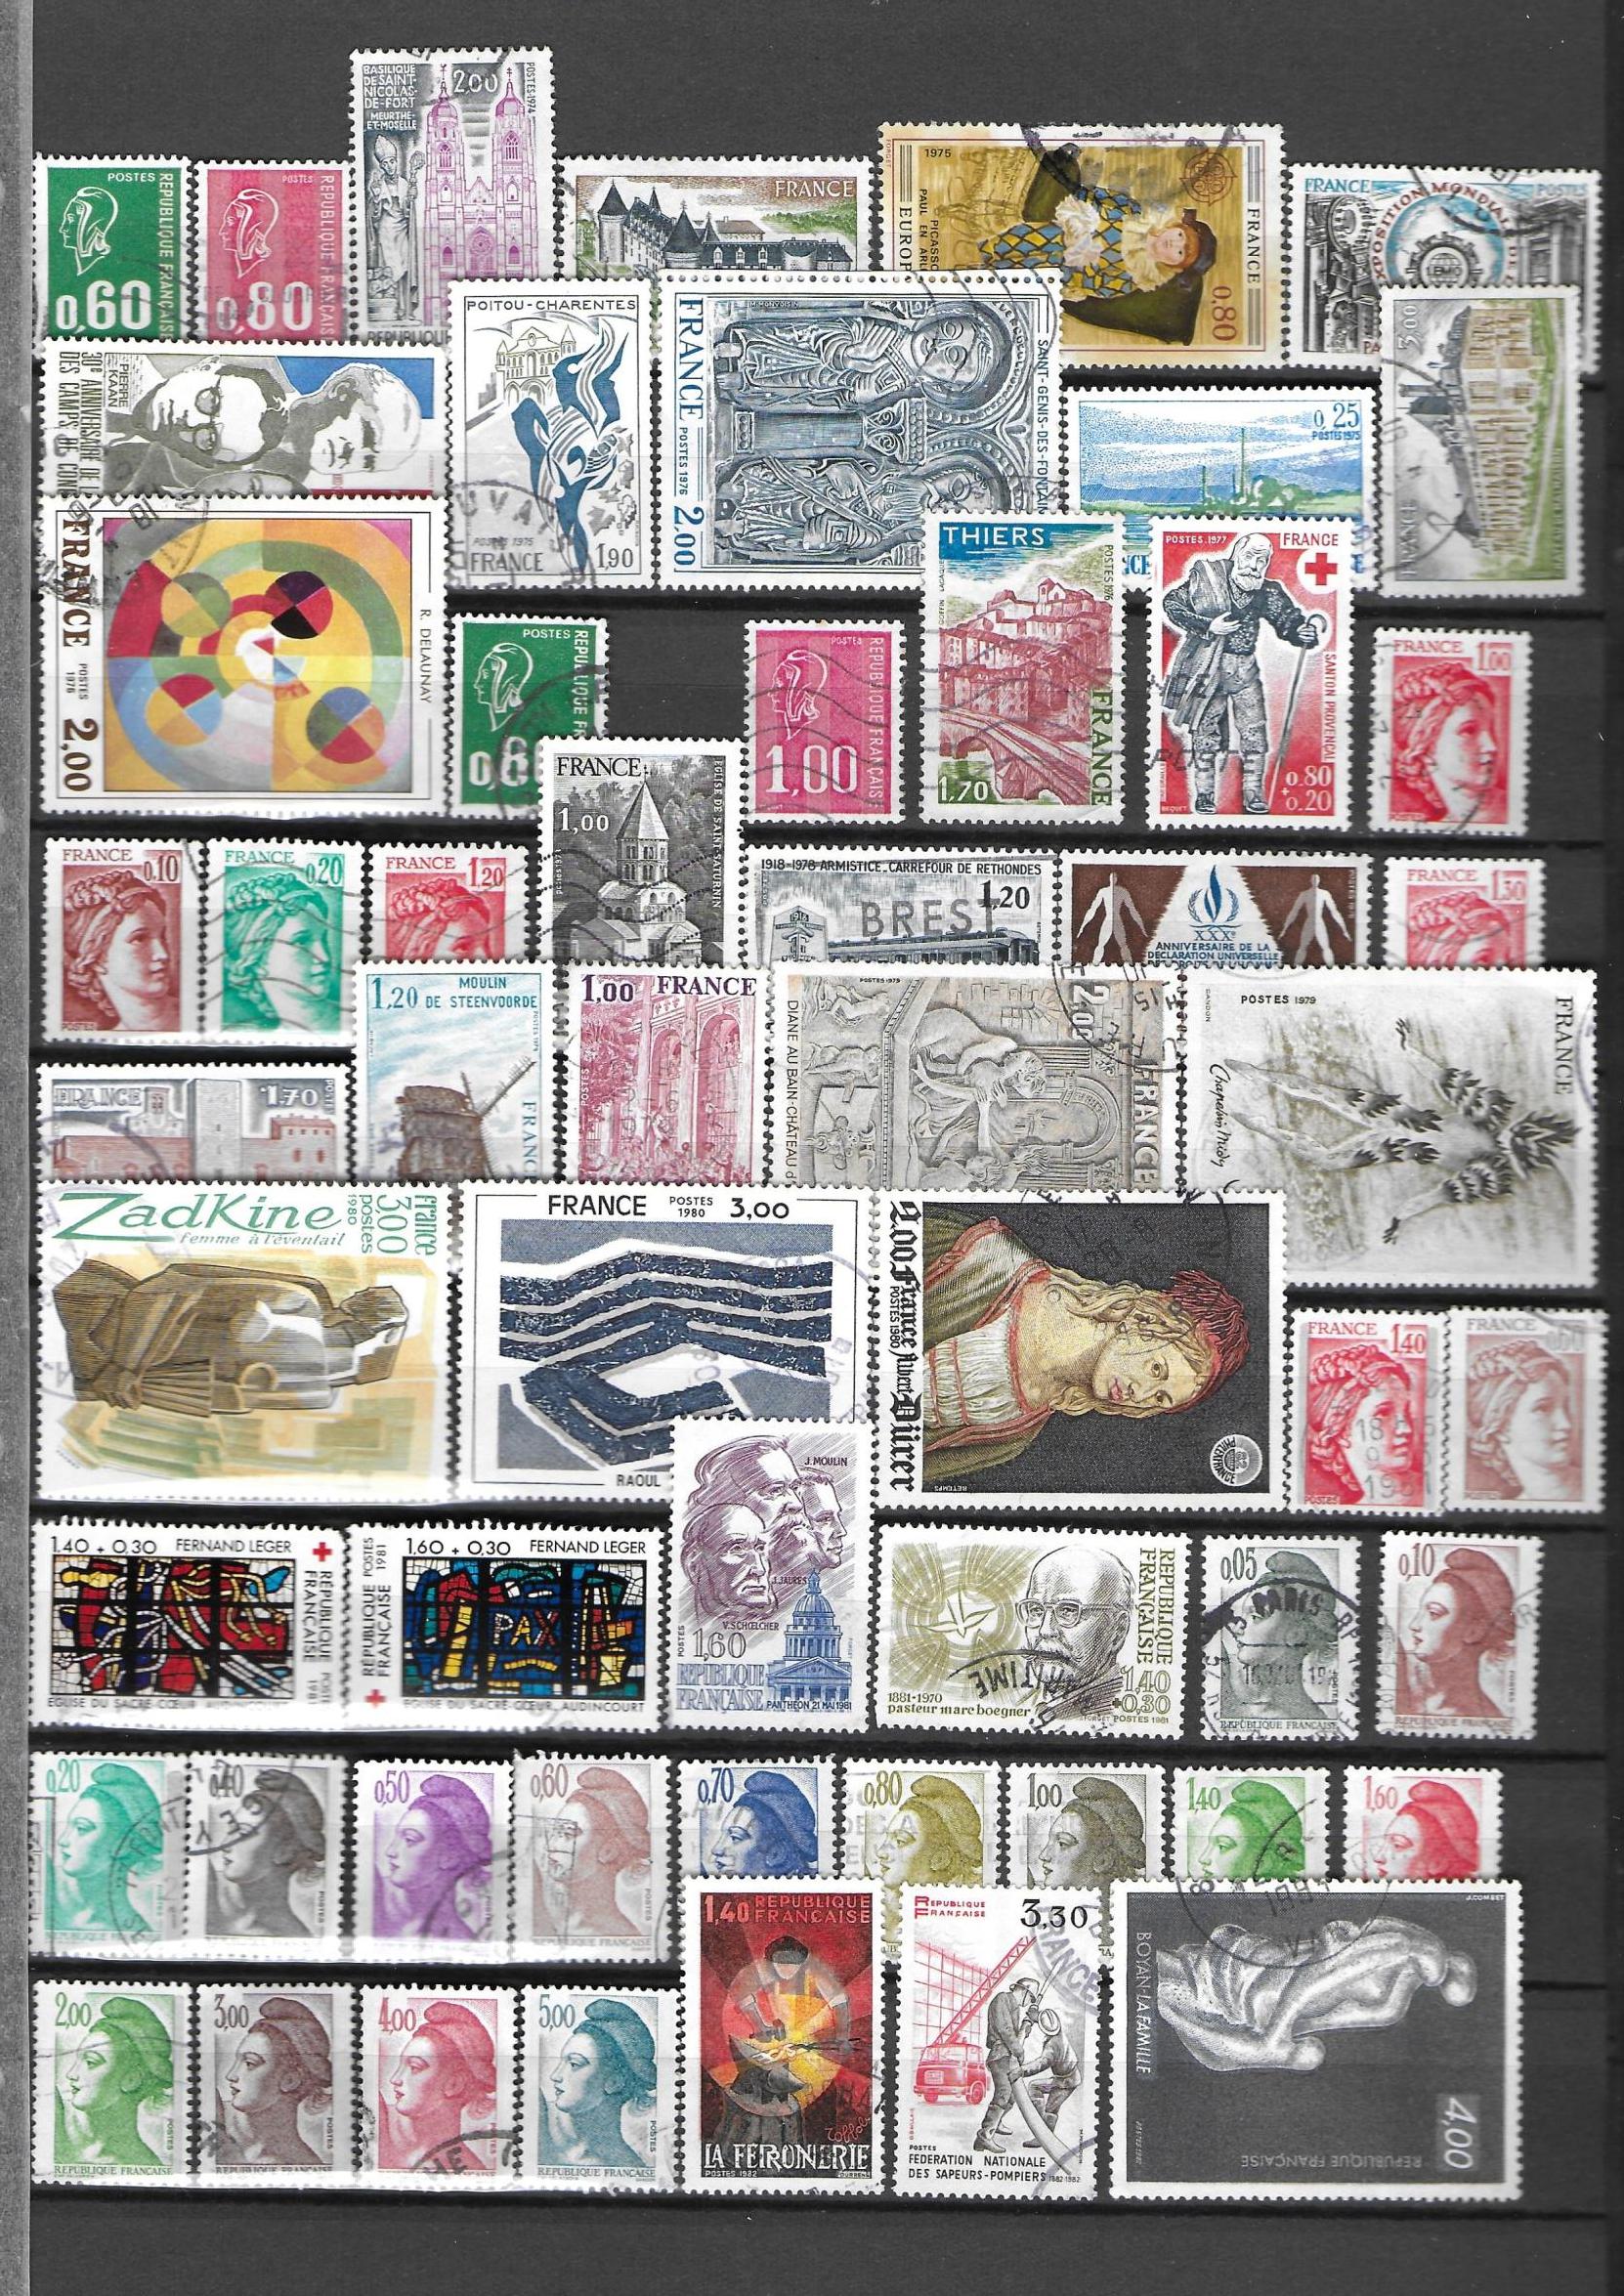 Timbres France 3 - Copie.jpg